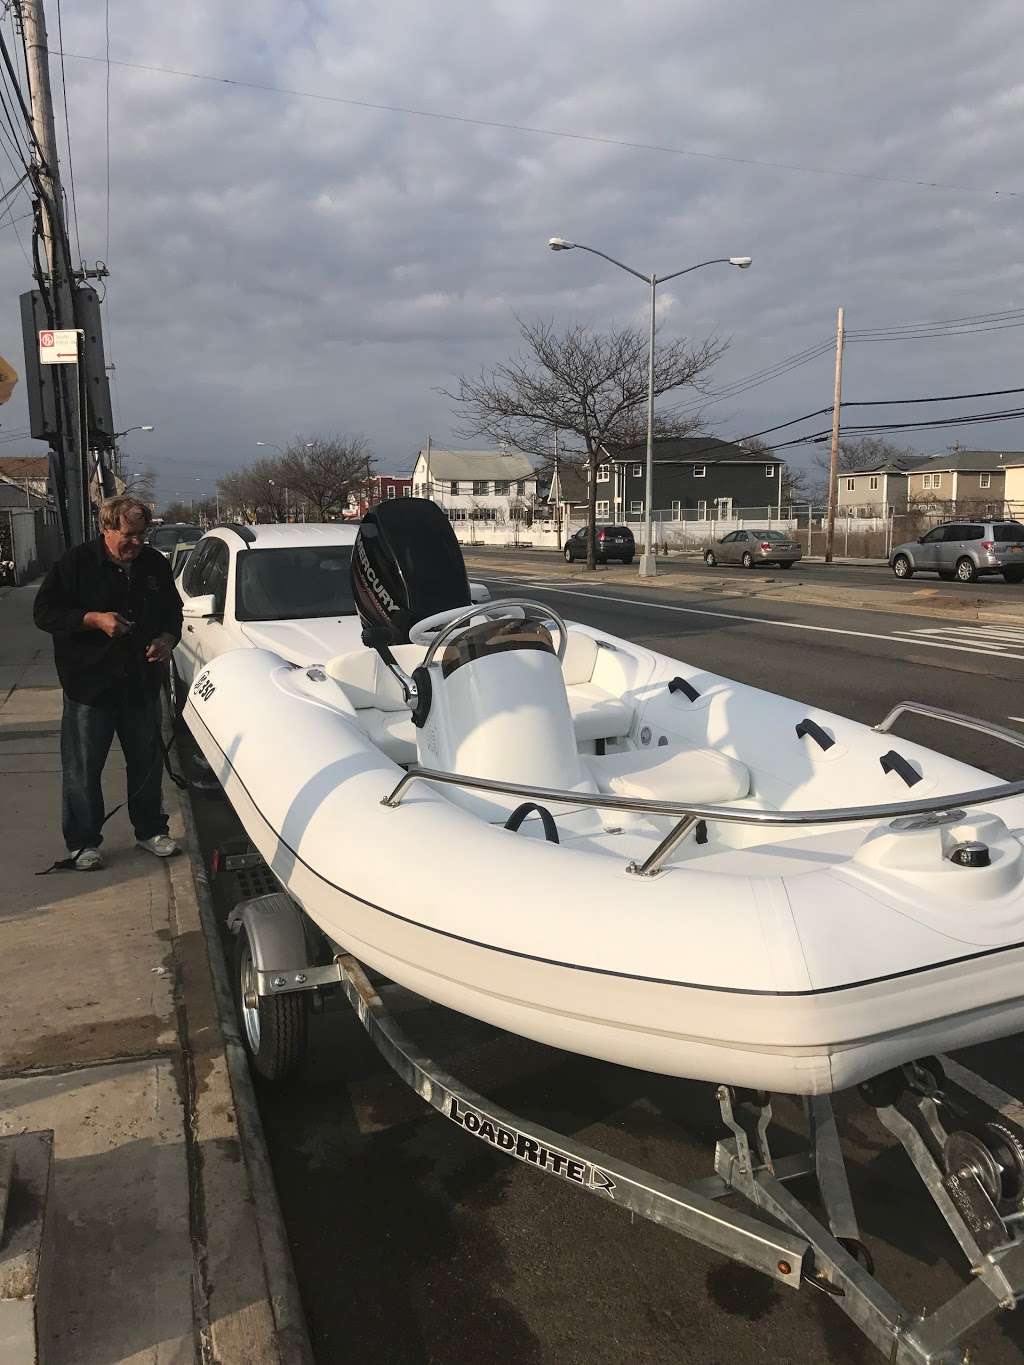 Busters Marine Service | 1911 Cross Bay Blvd, Broad Channel, NY 11693 | Phone: (718) 945-4377